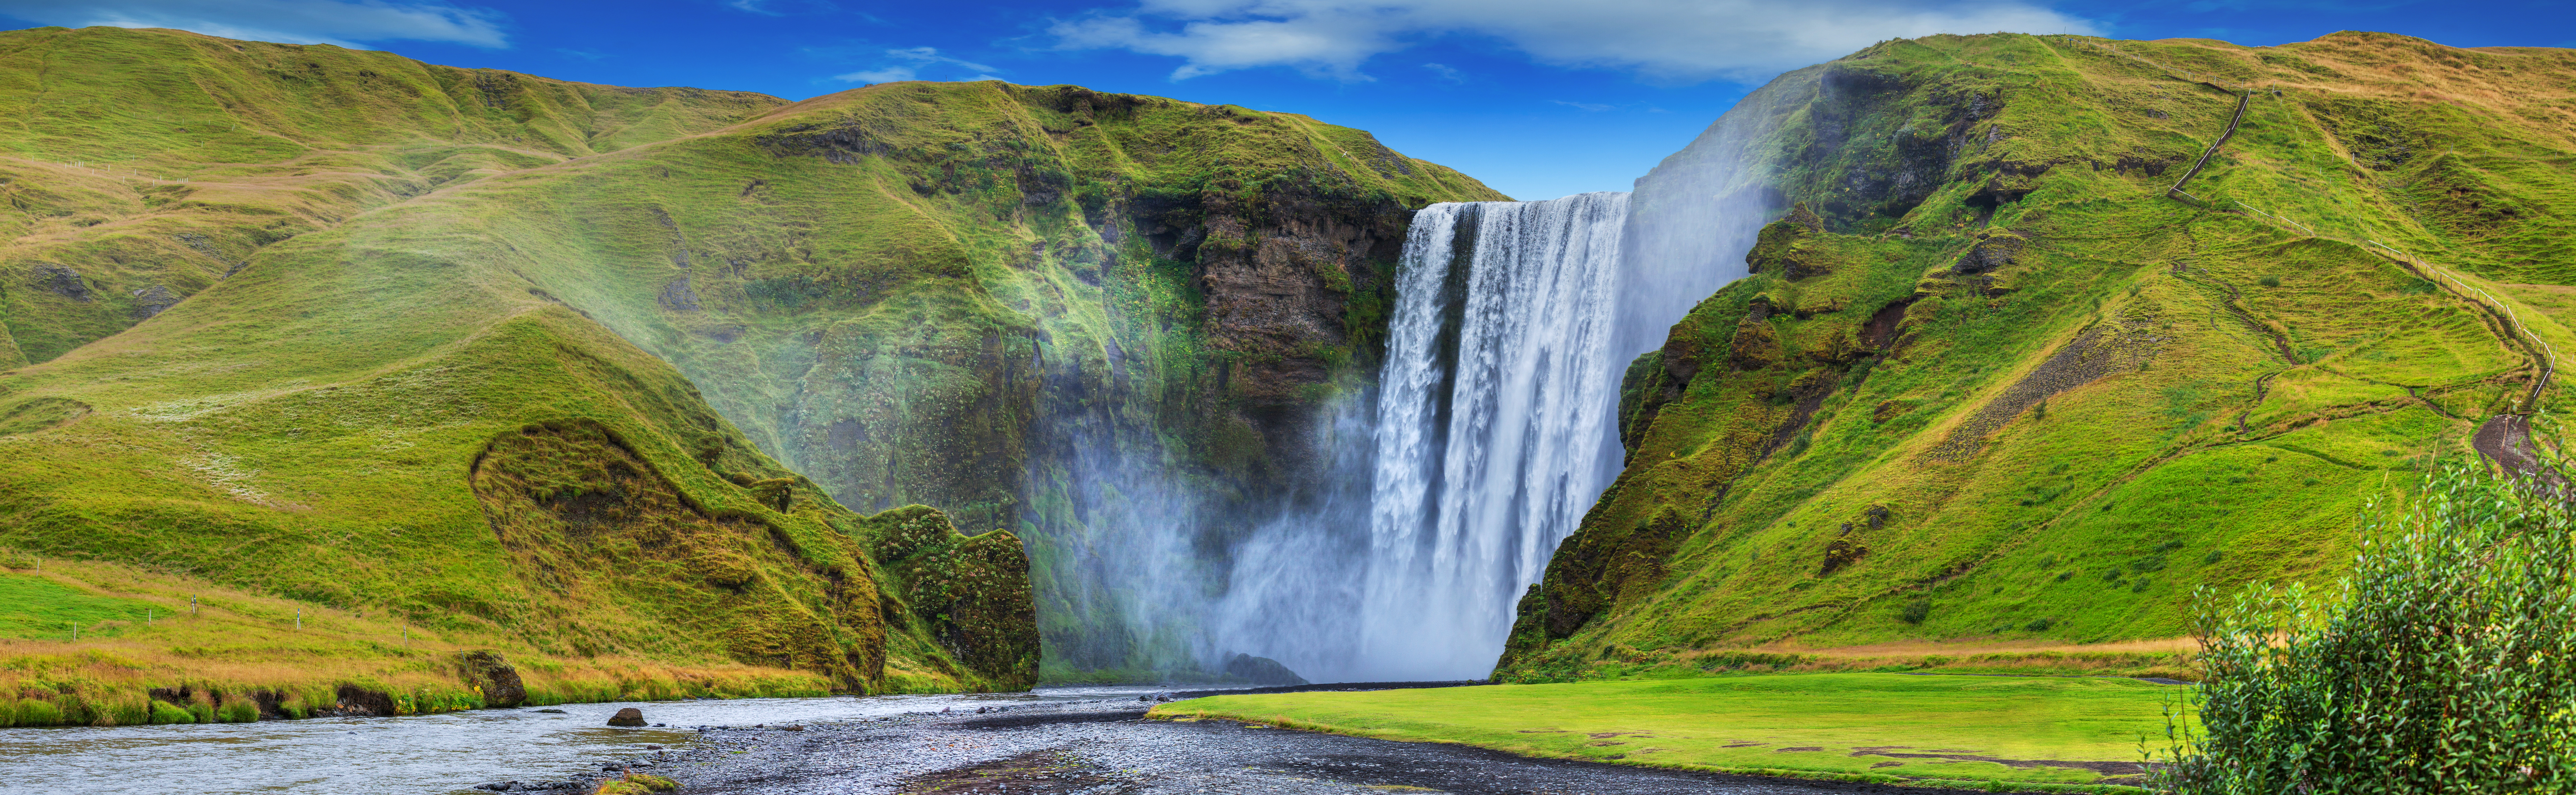 Incredible 9 Day Vacation in Iceland with Your Family - Seljalandsfoss Waterfall